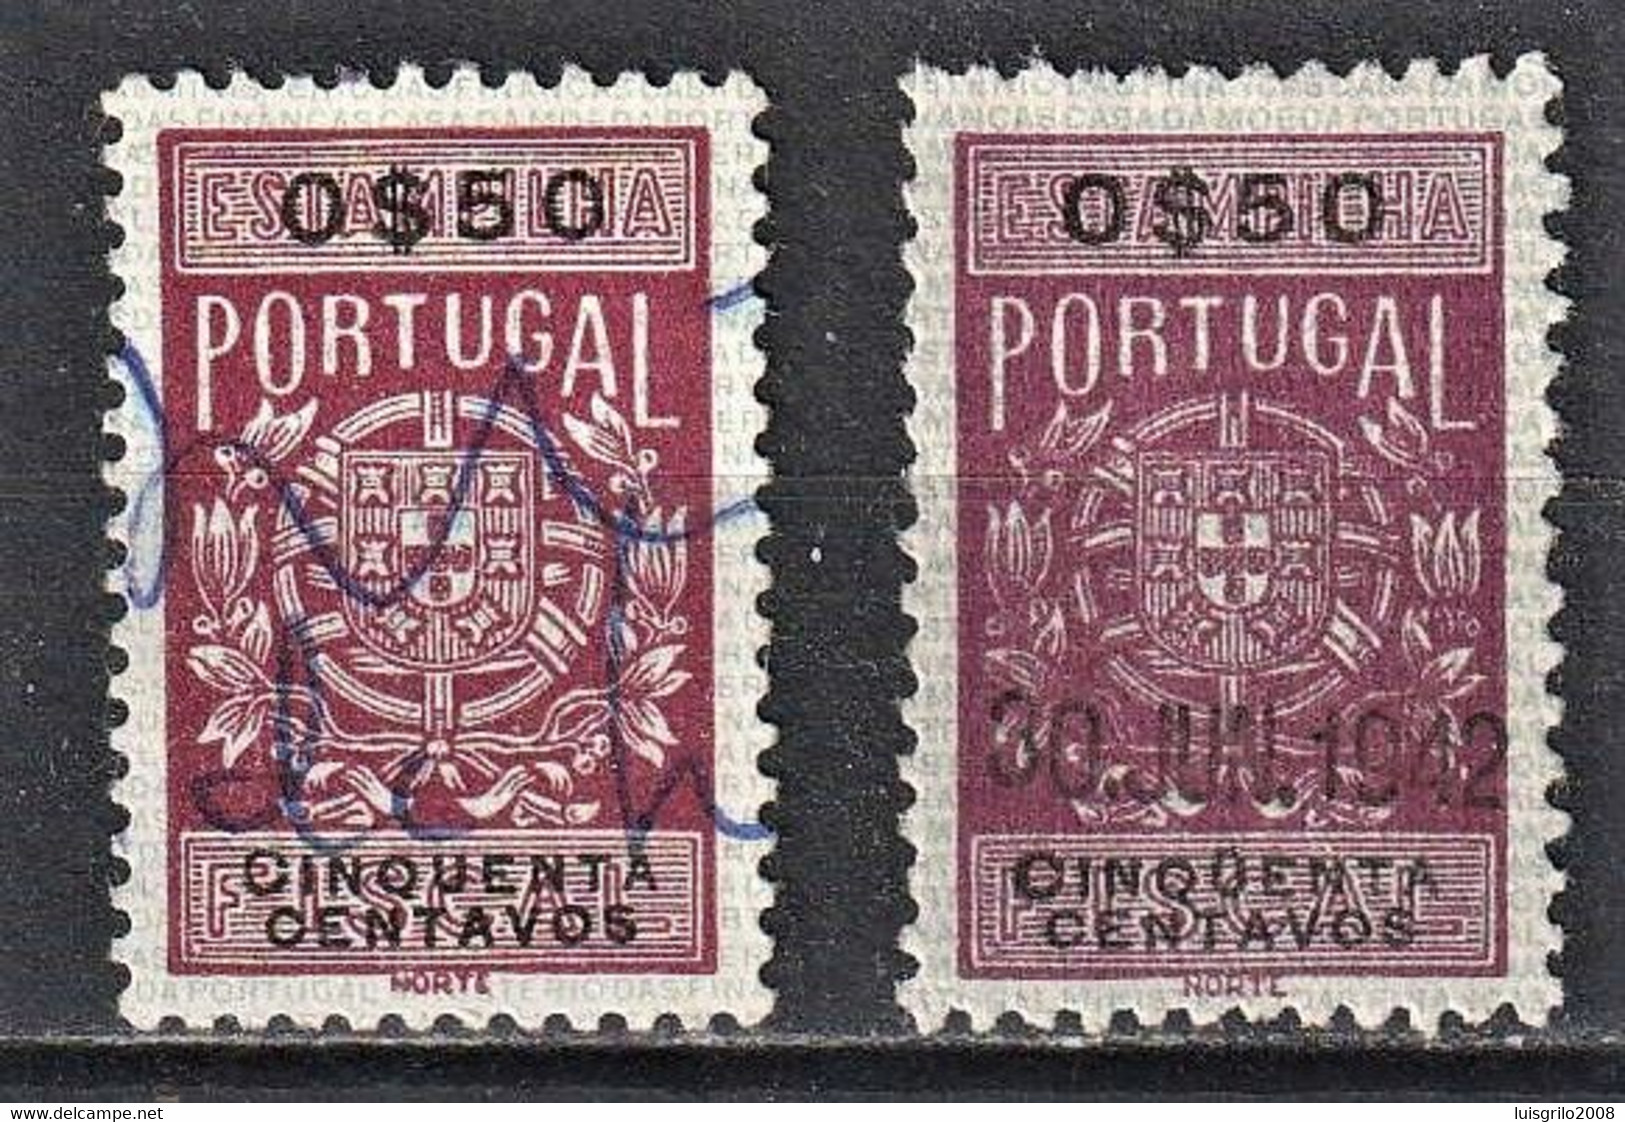 Fiscal/ Revenue, Portugal 1940 - Estampilha Fiscal -|- RARE STAMP - 0$50 Cinqüenta (Accents On The Letter U) - Used Stamps